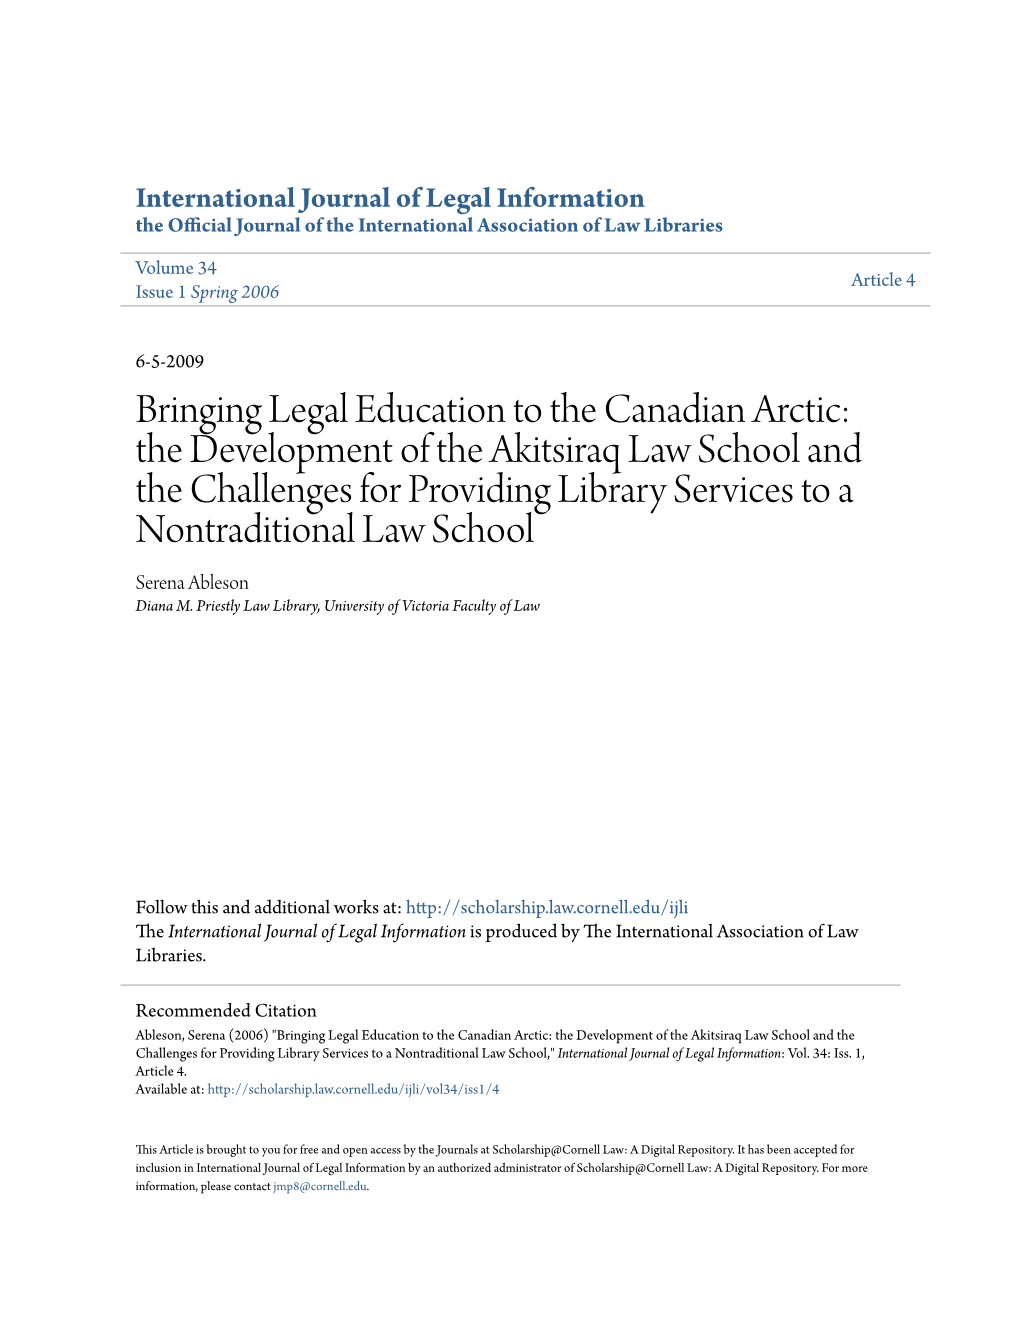 Bringing Legal Education to the Canadian Arctic: the Development